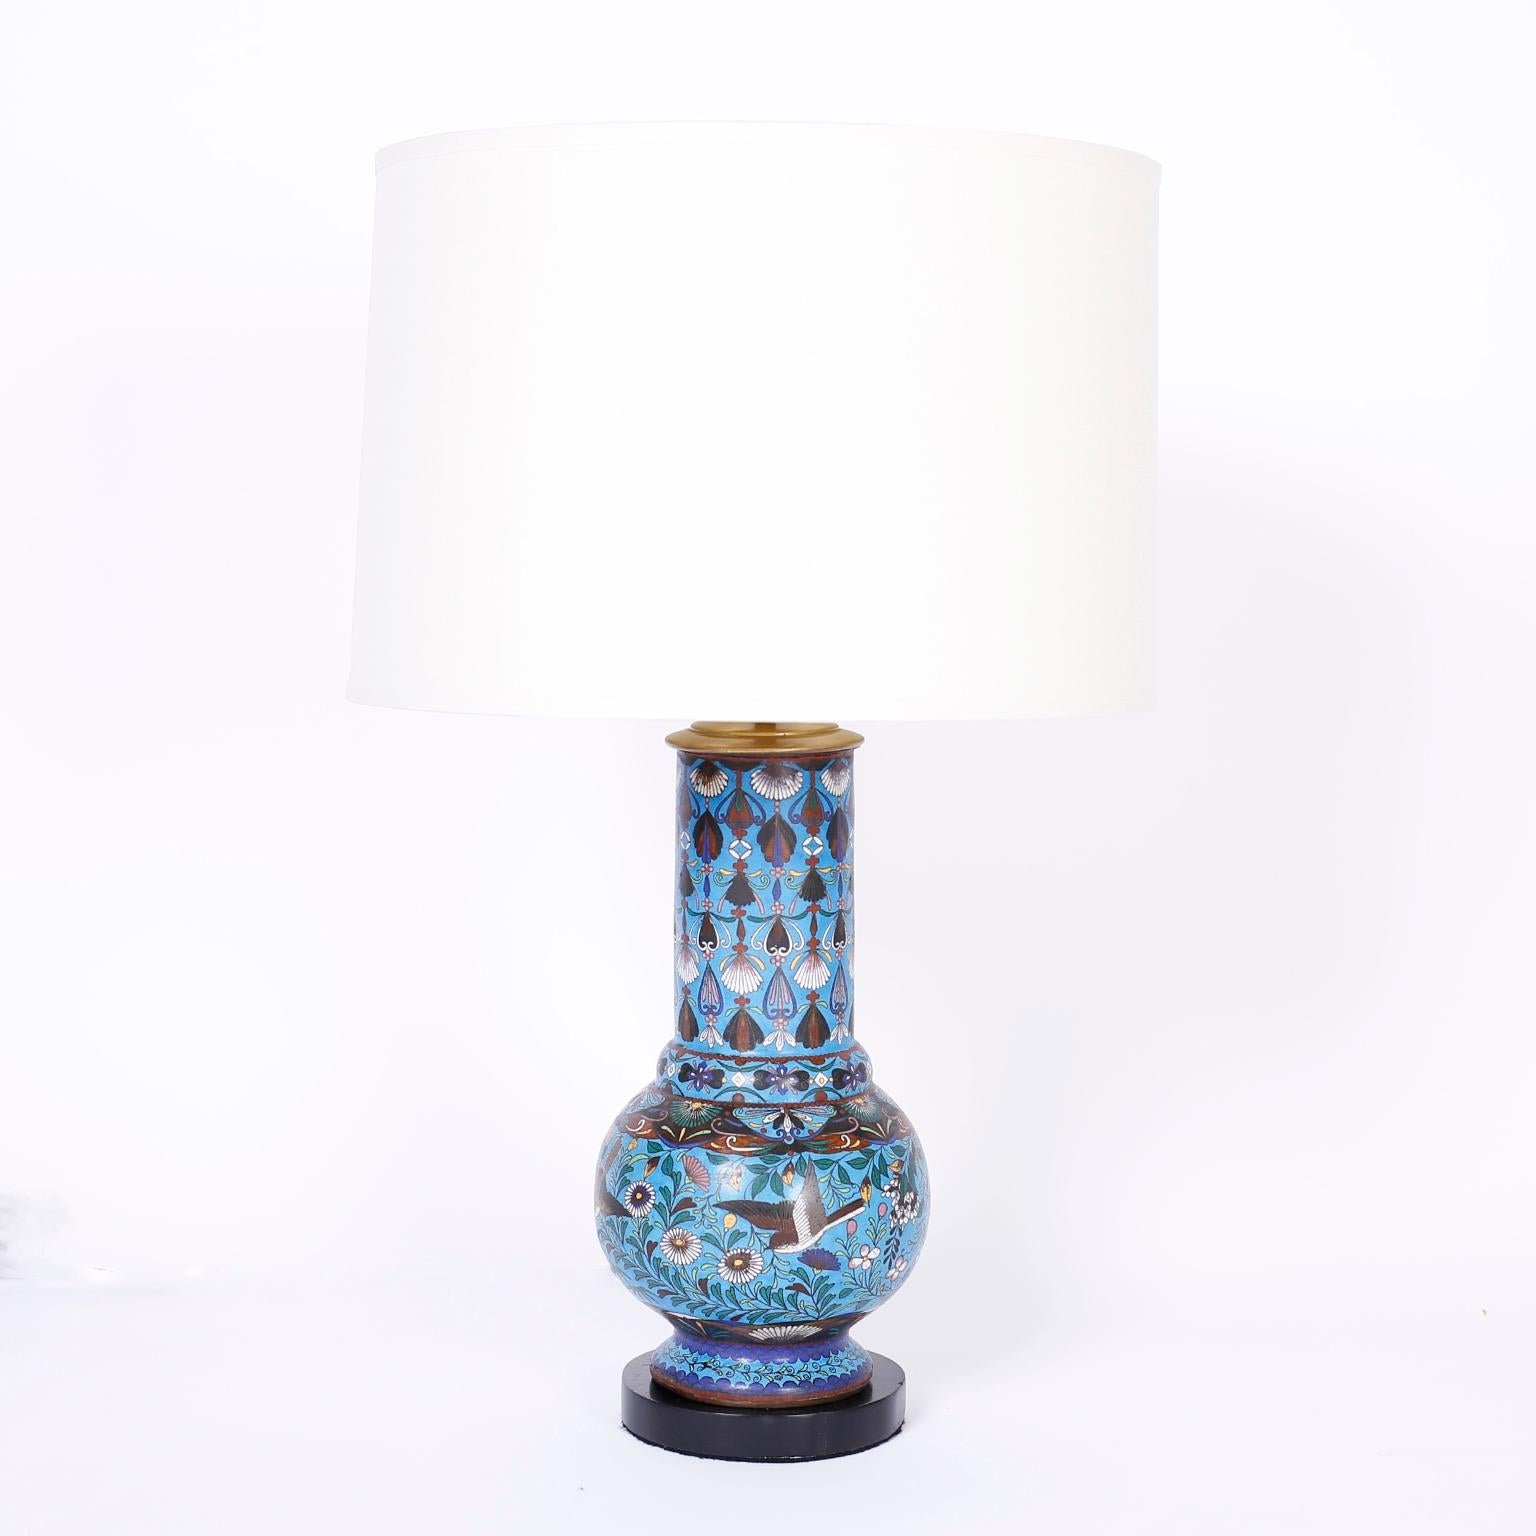 Pair of Chinese cloisonné table lamps expertly crafted with enamel on copper, decorated with birds and flowers over an alluring blue field and presented on ebonized wood bases.